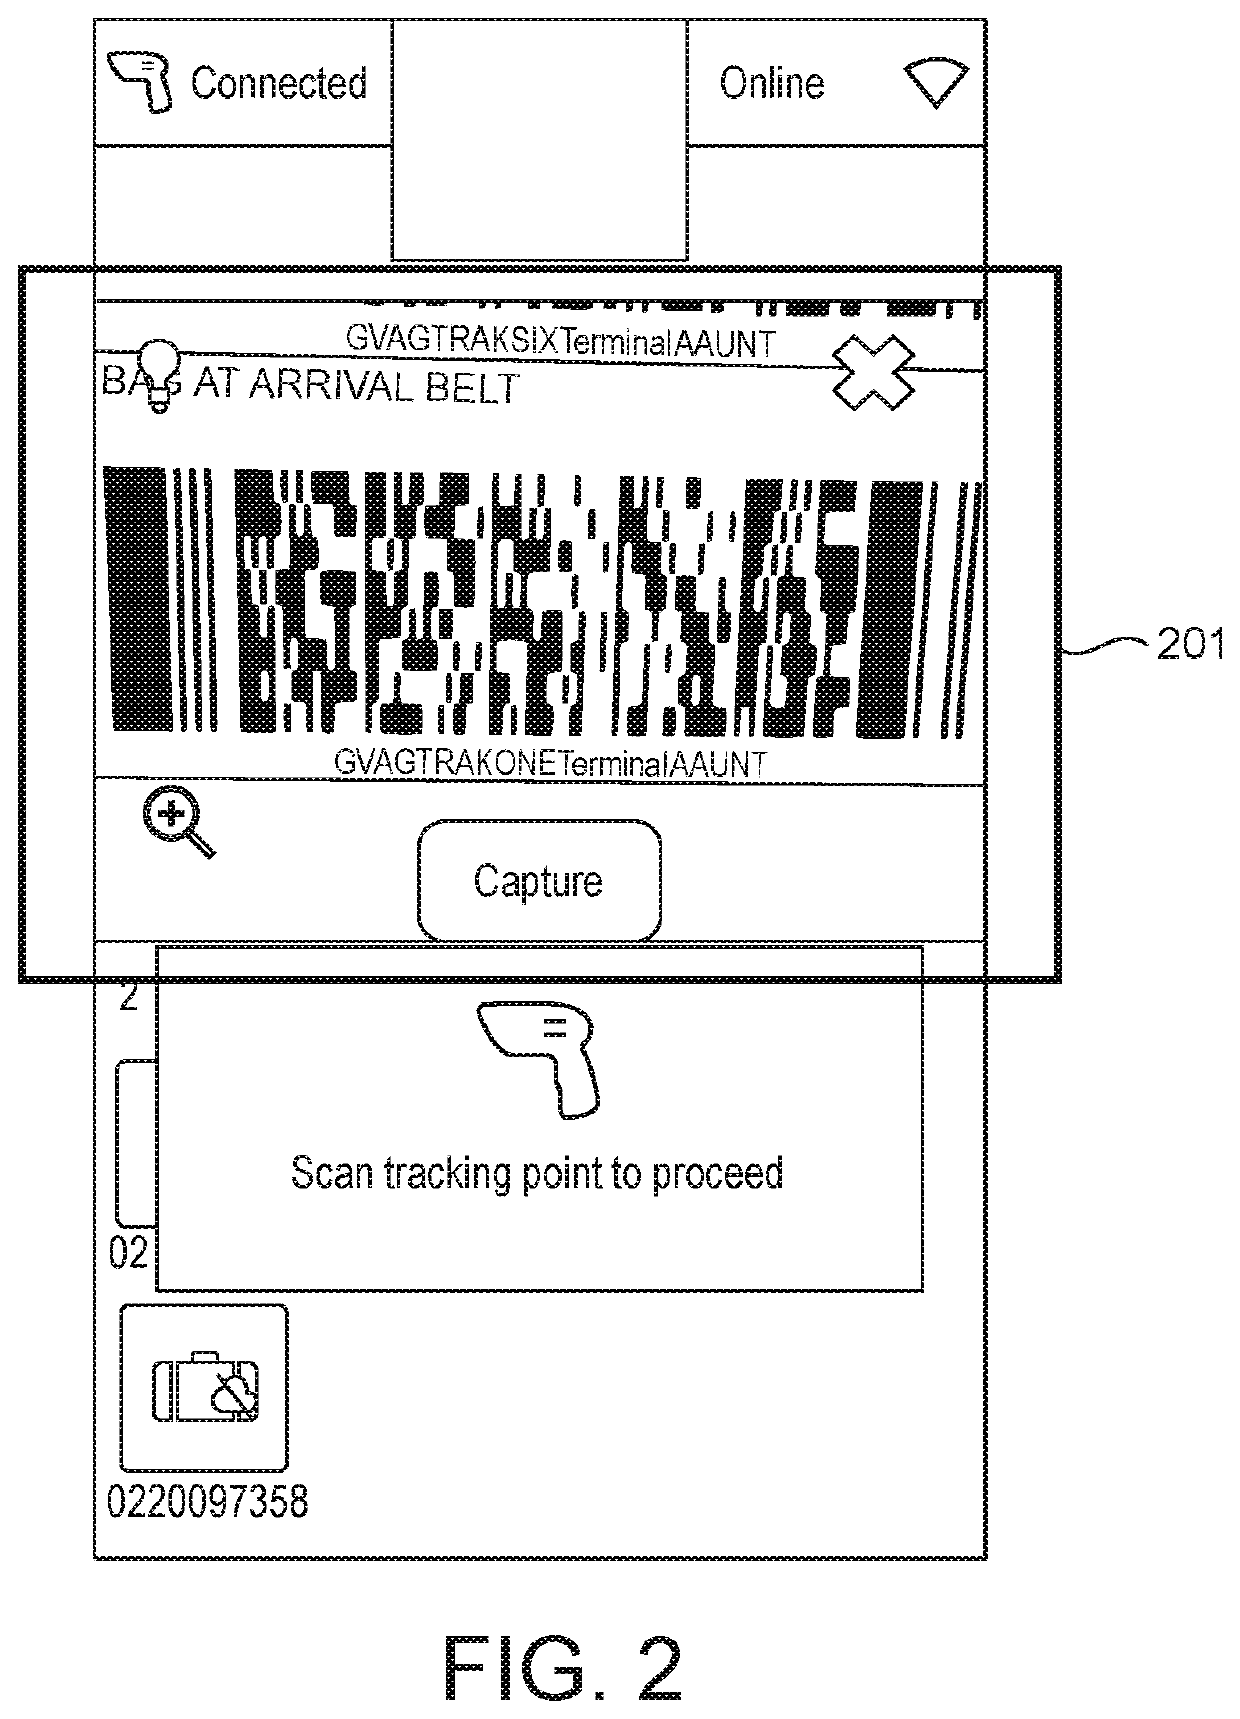 System and method for tracking baggage on cruise liners